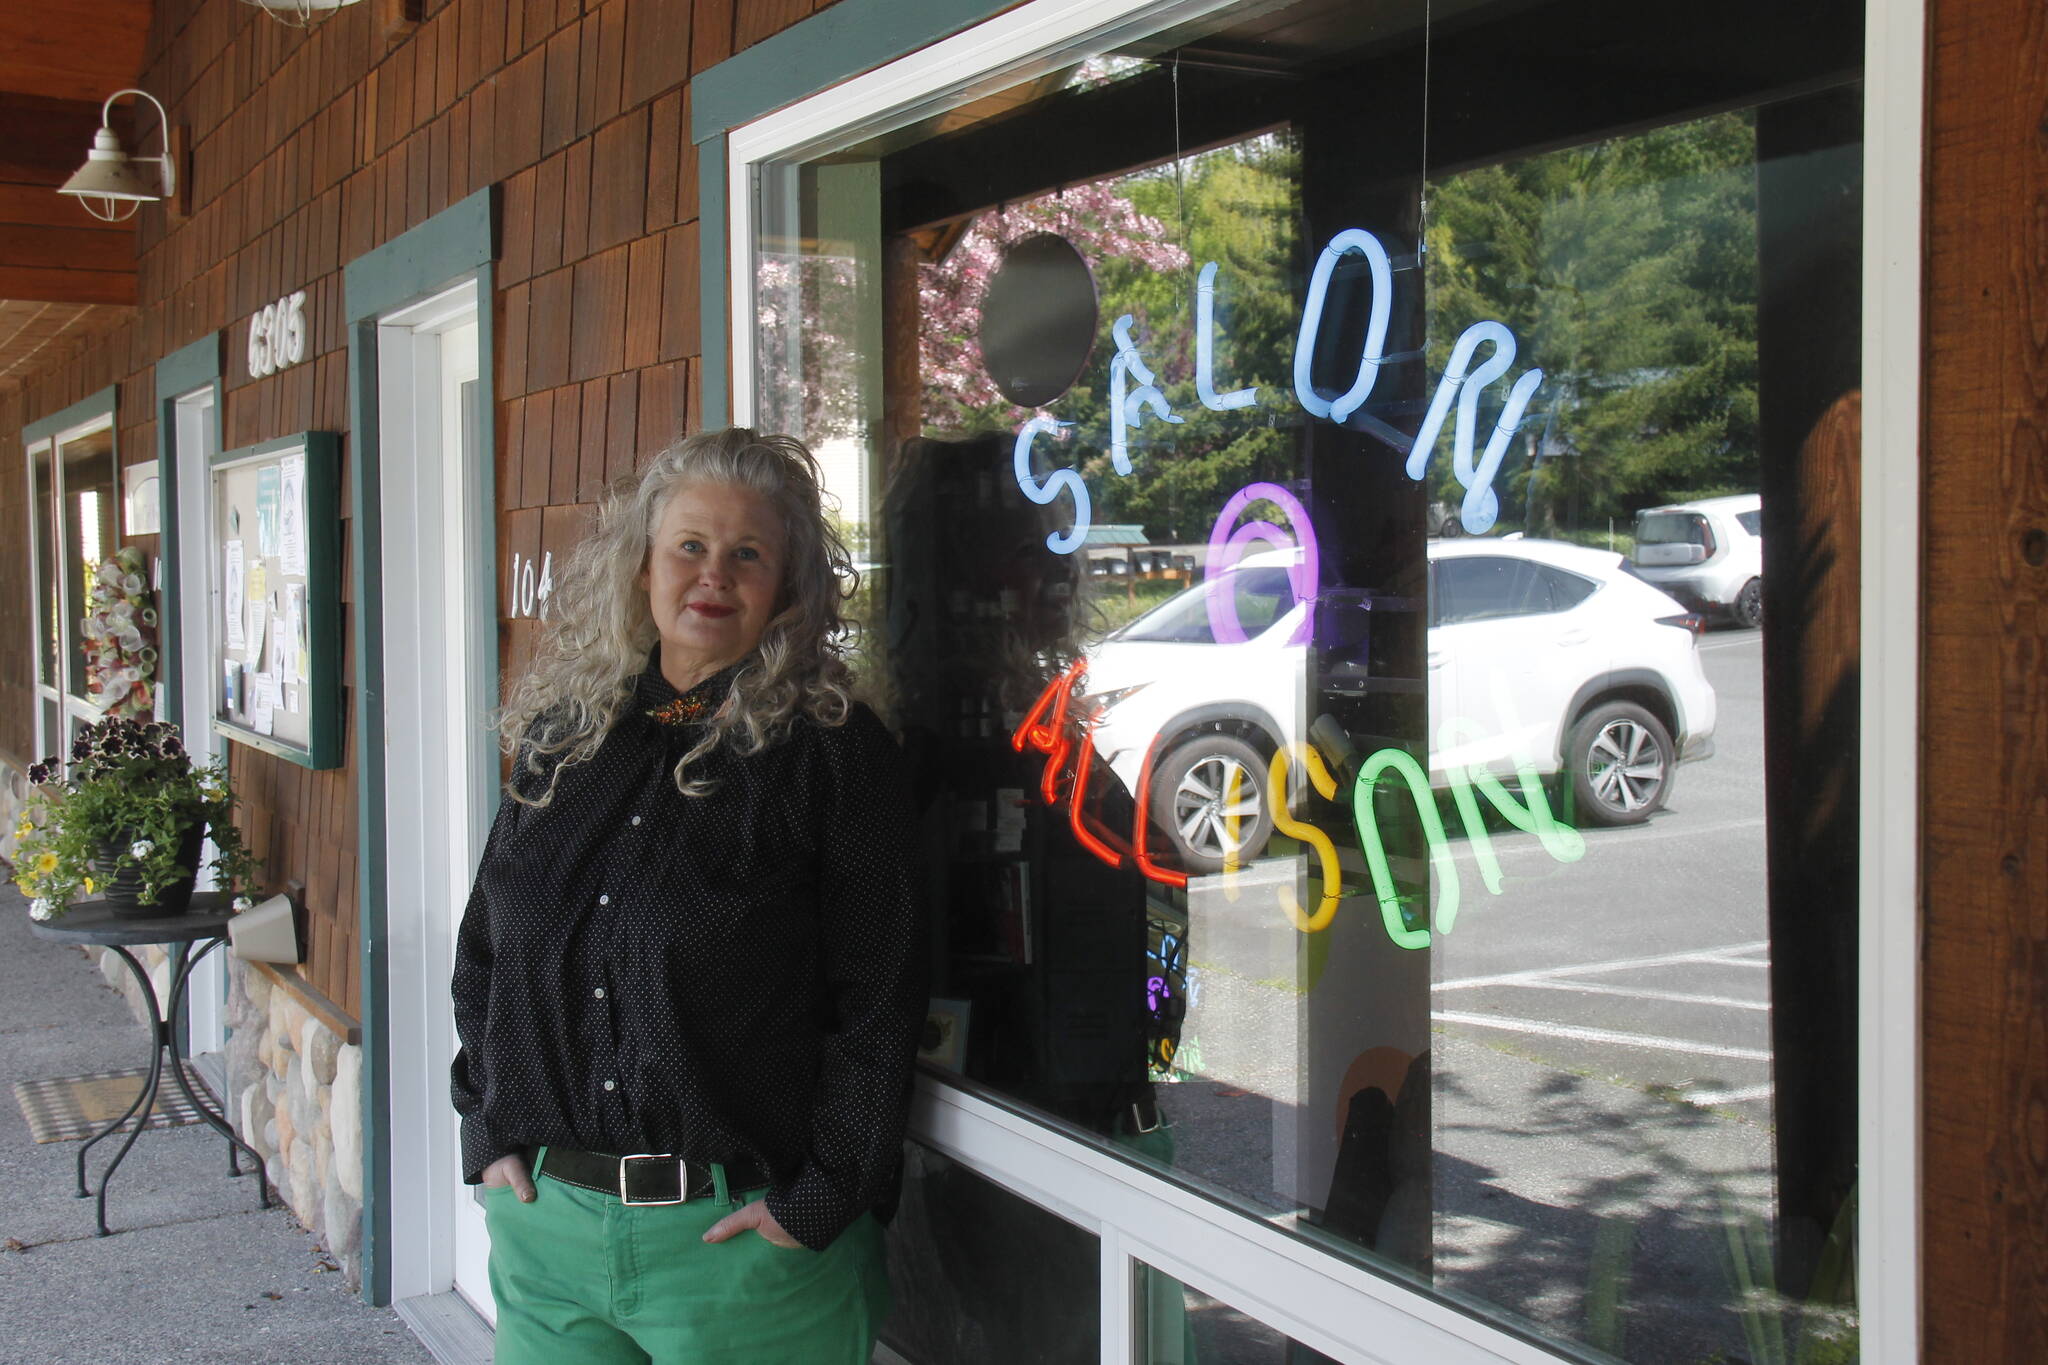 Alison Donham is the owner of Salon All is On, which opened for the first time on South Whidbey just six months ago. (Photo by Kira Erickson/South Whidbey Record)